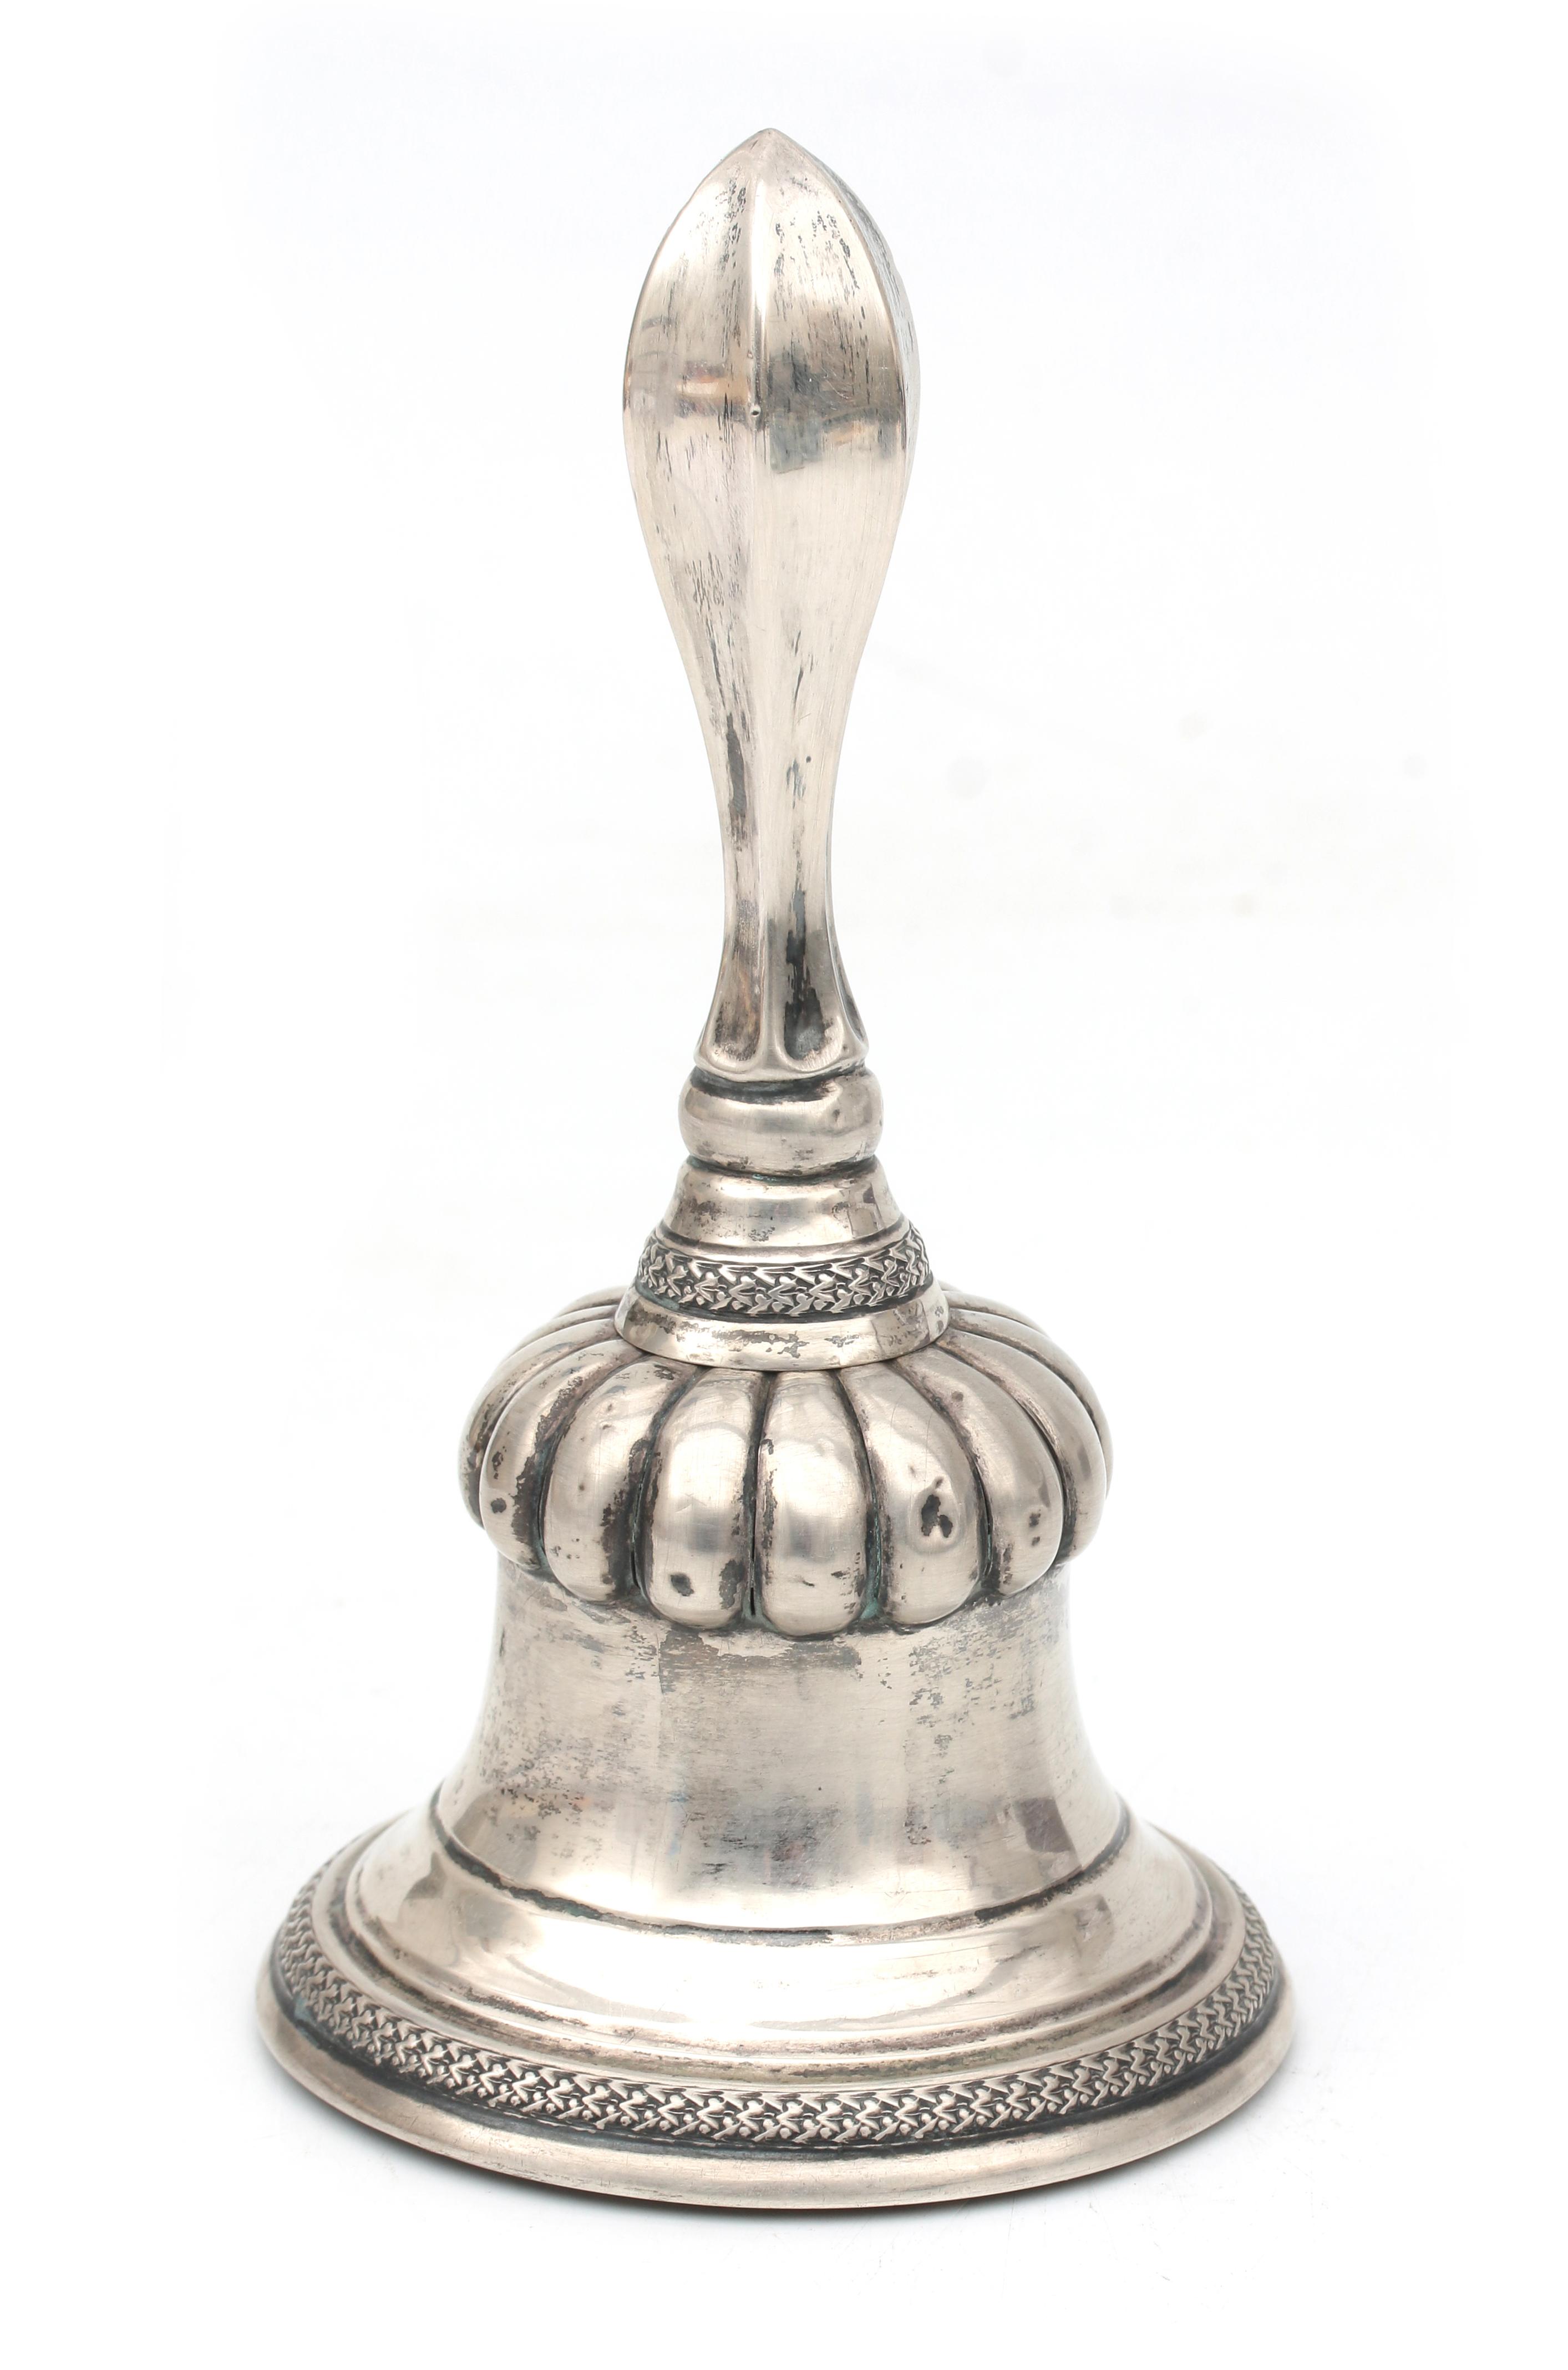 A silver table bell, 1841-1877.